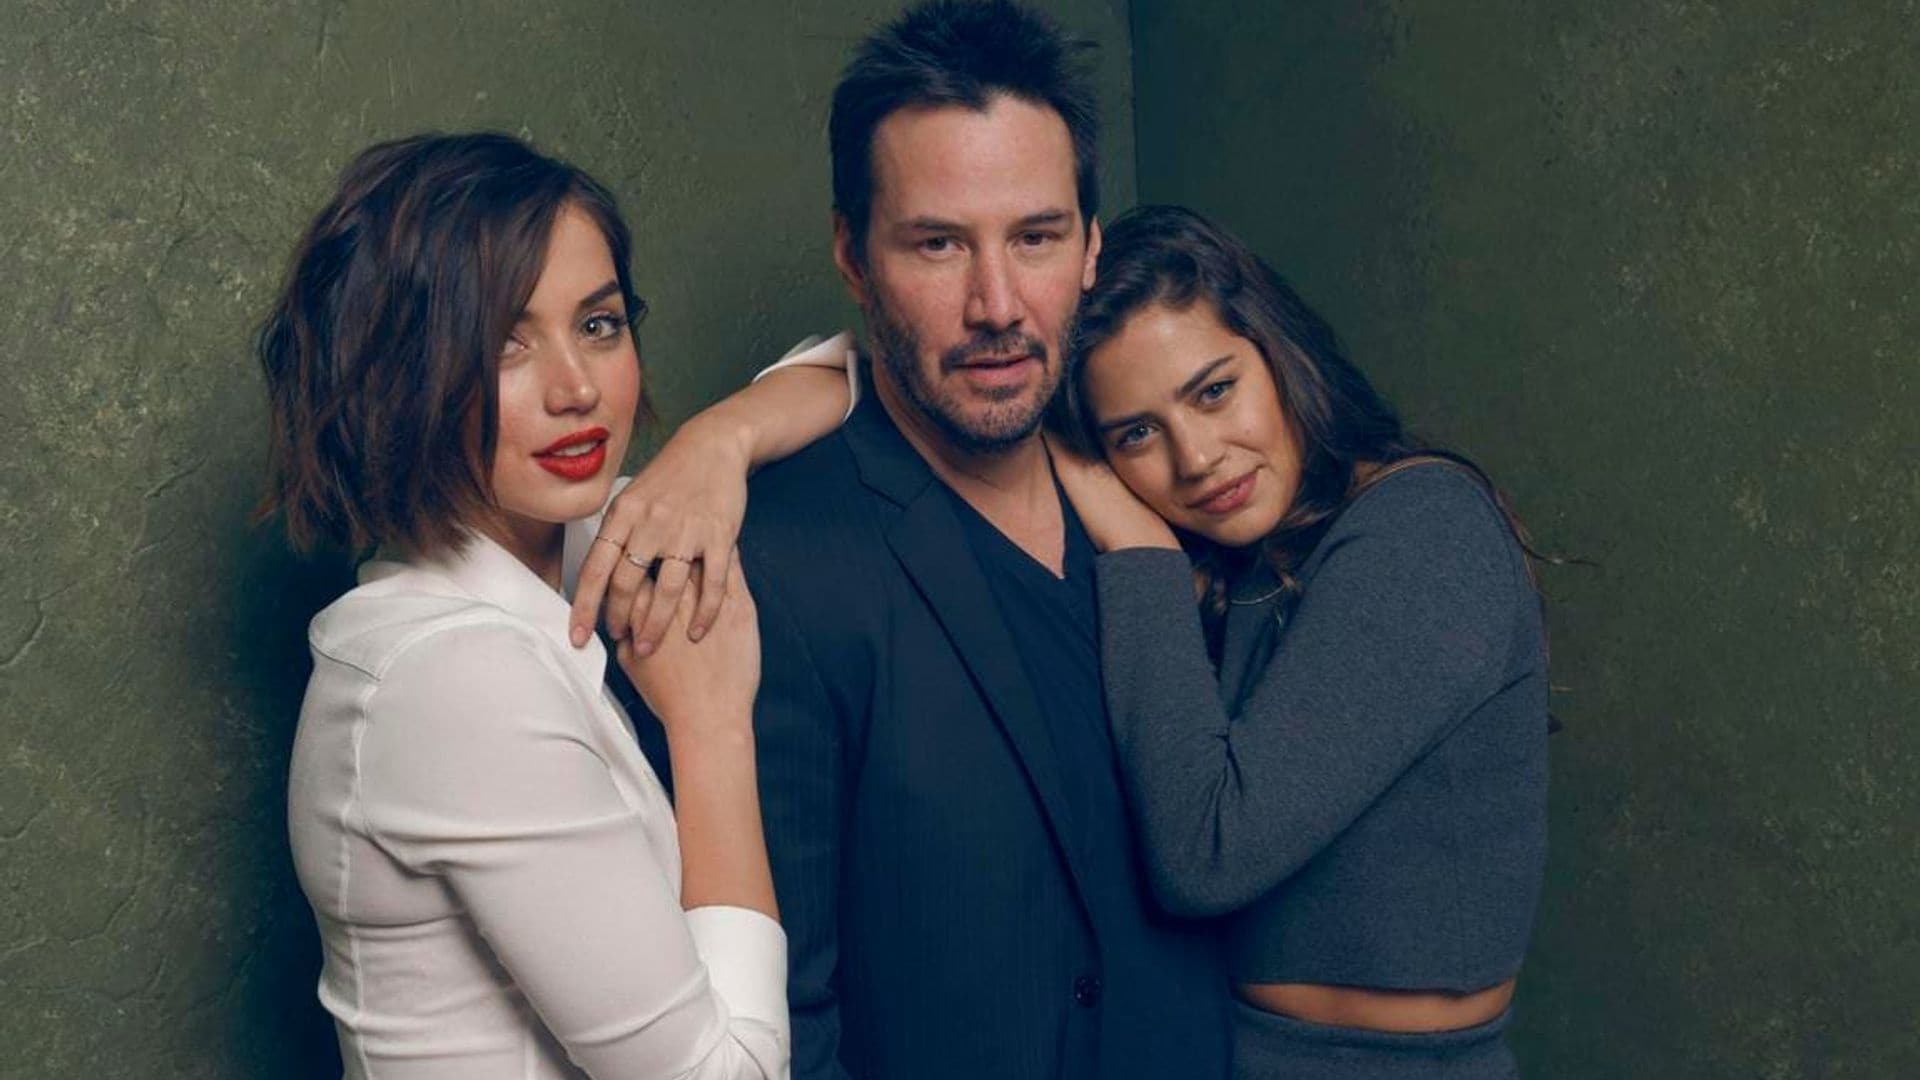 A forgotten Ana de Armas and Keanu Reeves thriller is number 3 on Netflix